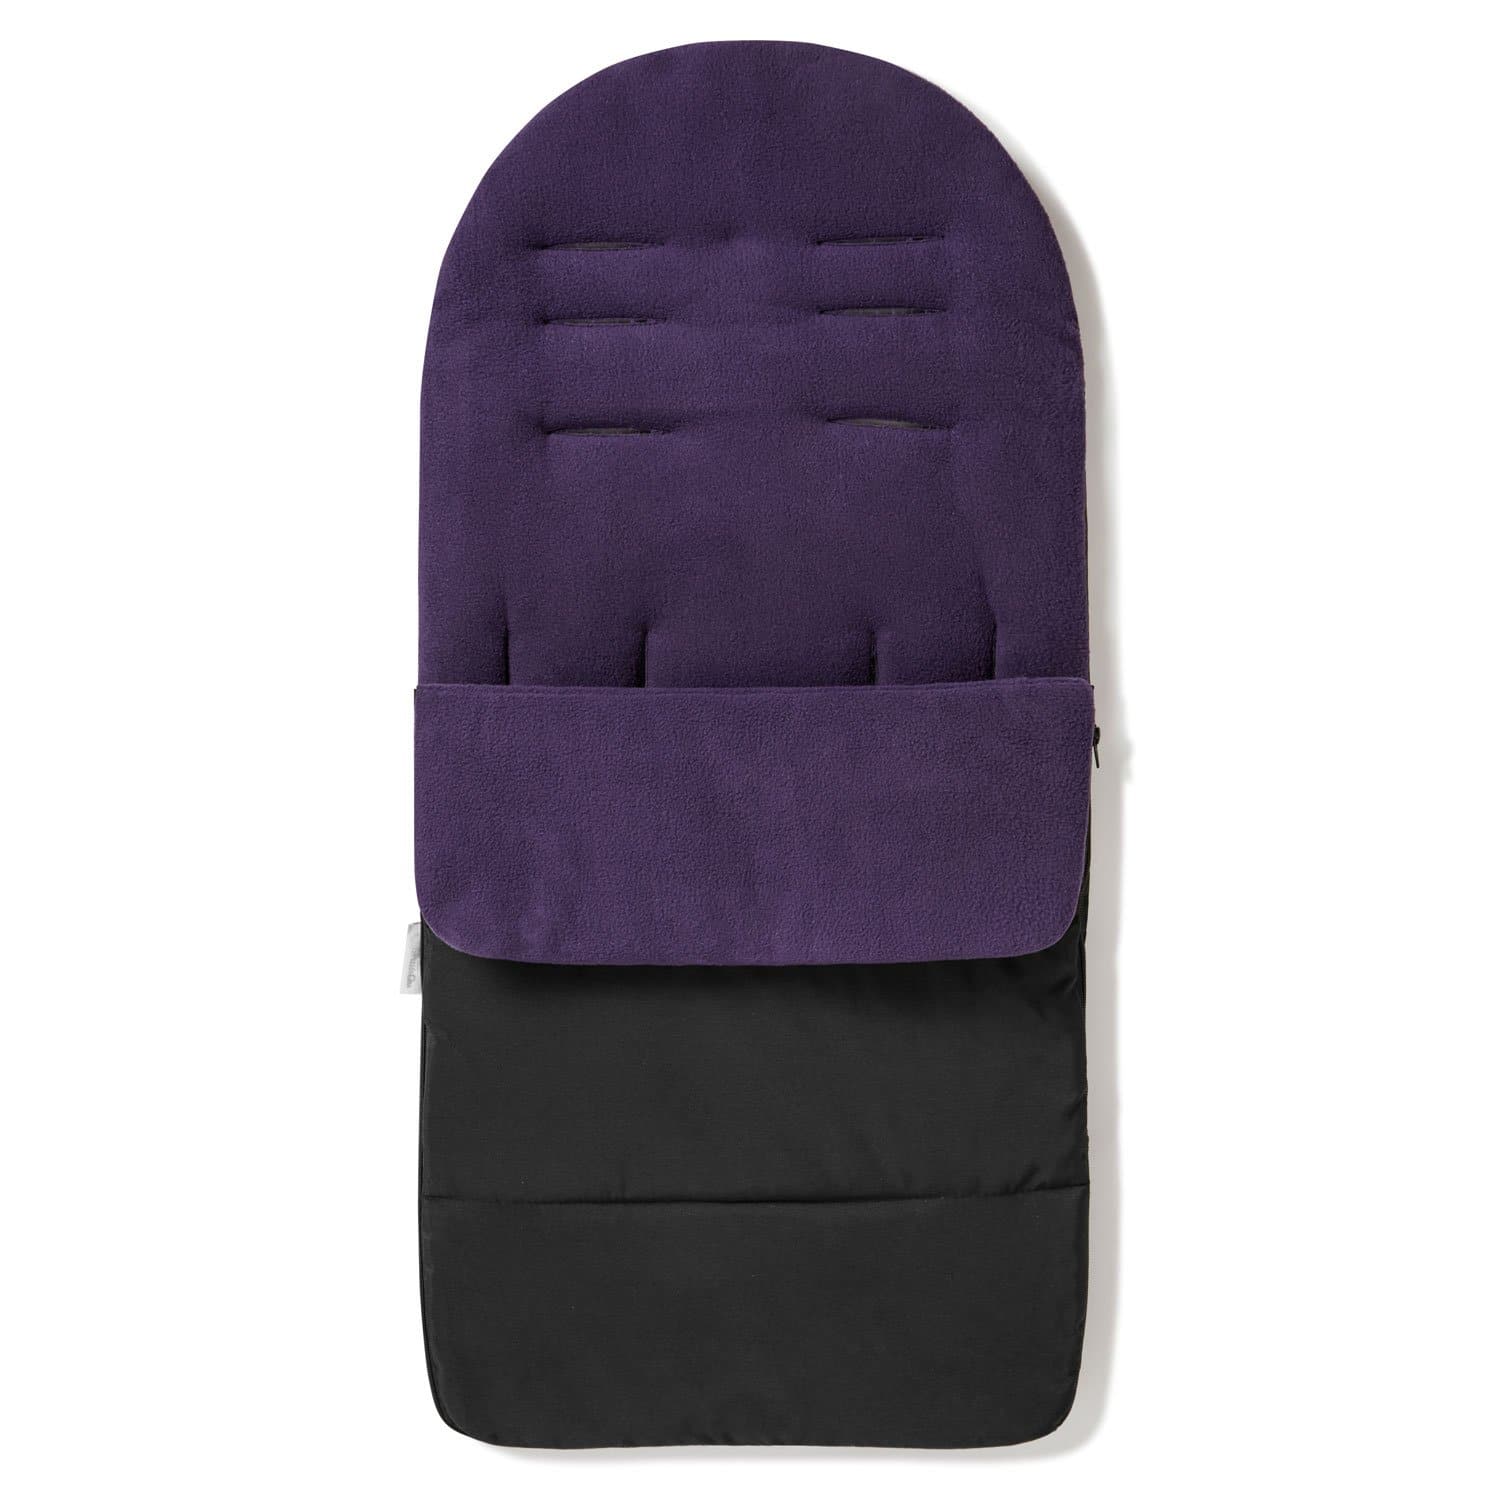 Premium Footmuff / Cosy Toes Compatible with Joie - Plum Purple / Fits All Models | For Your Little One